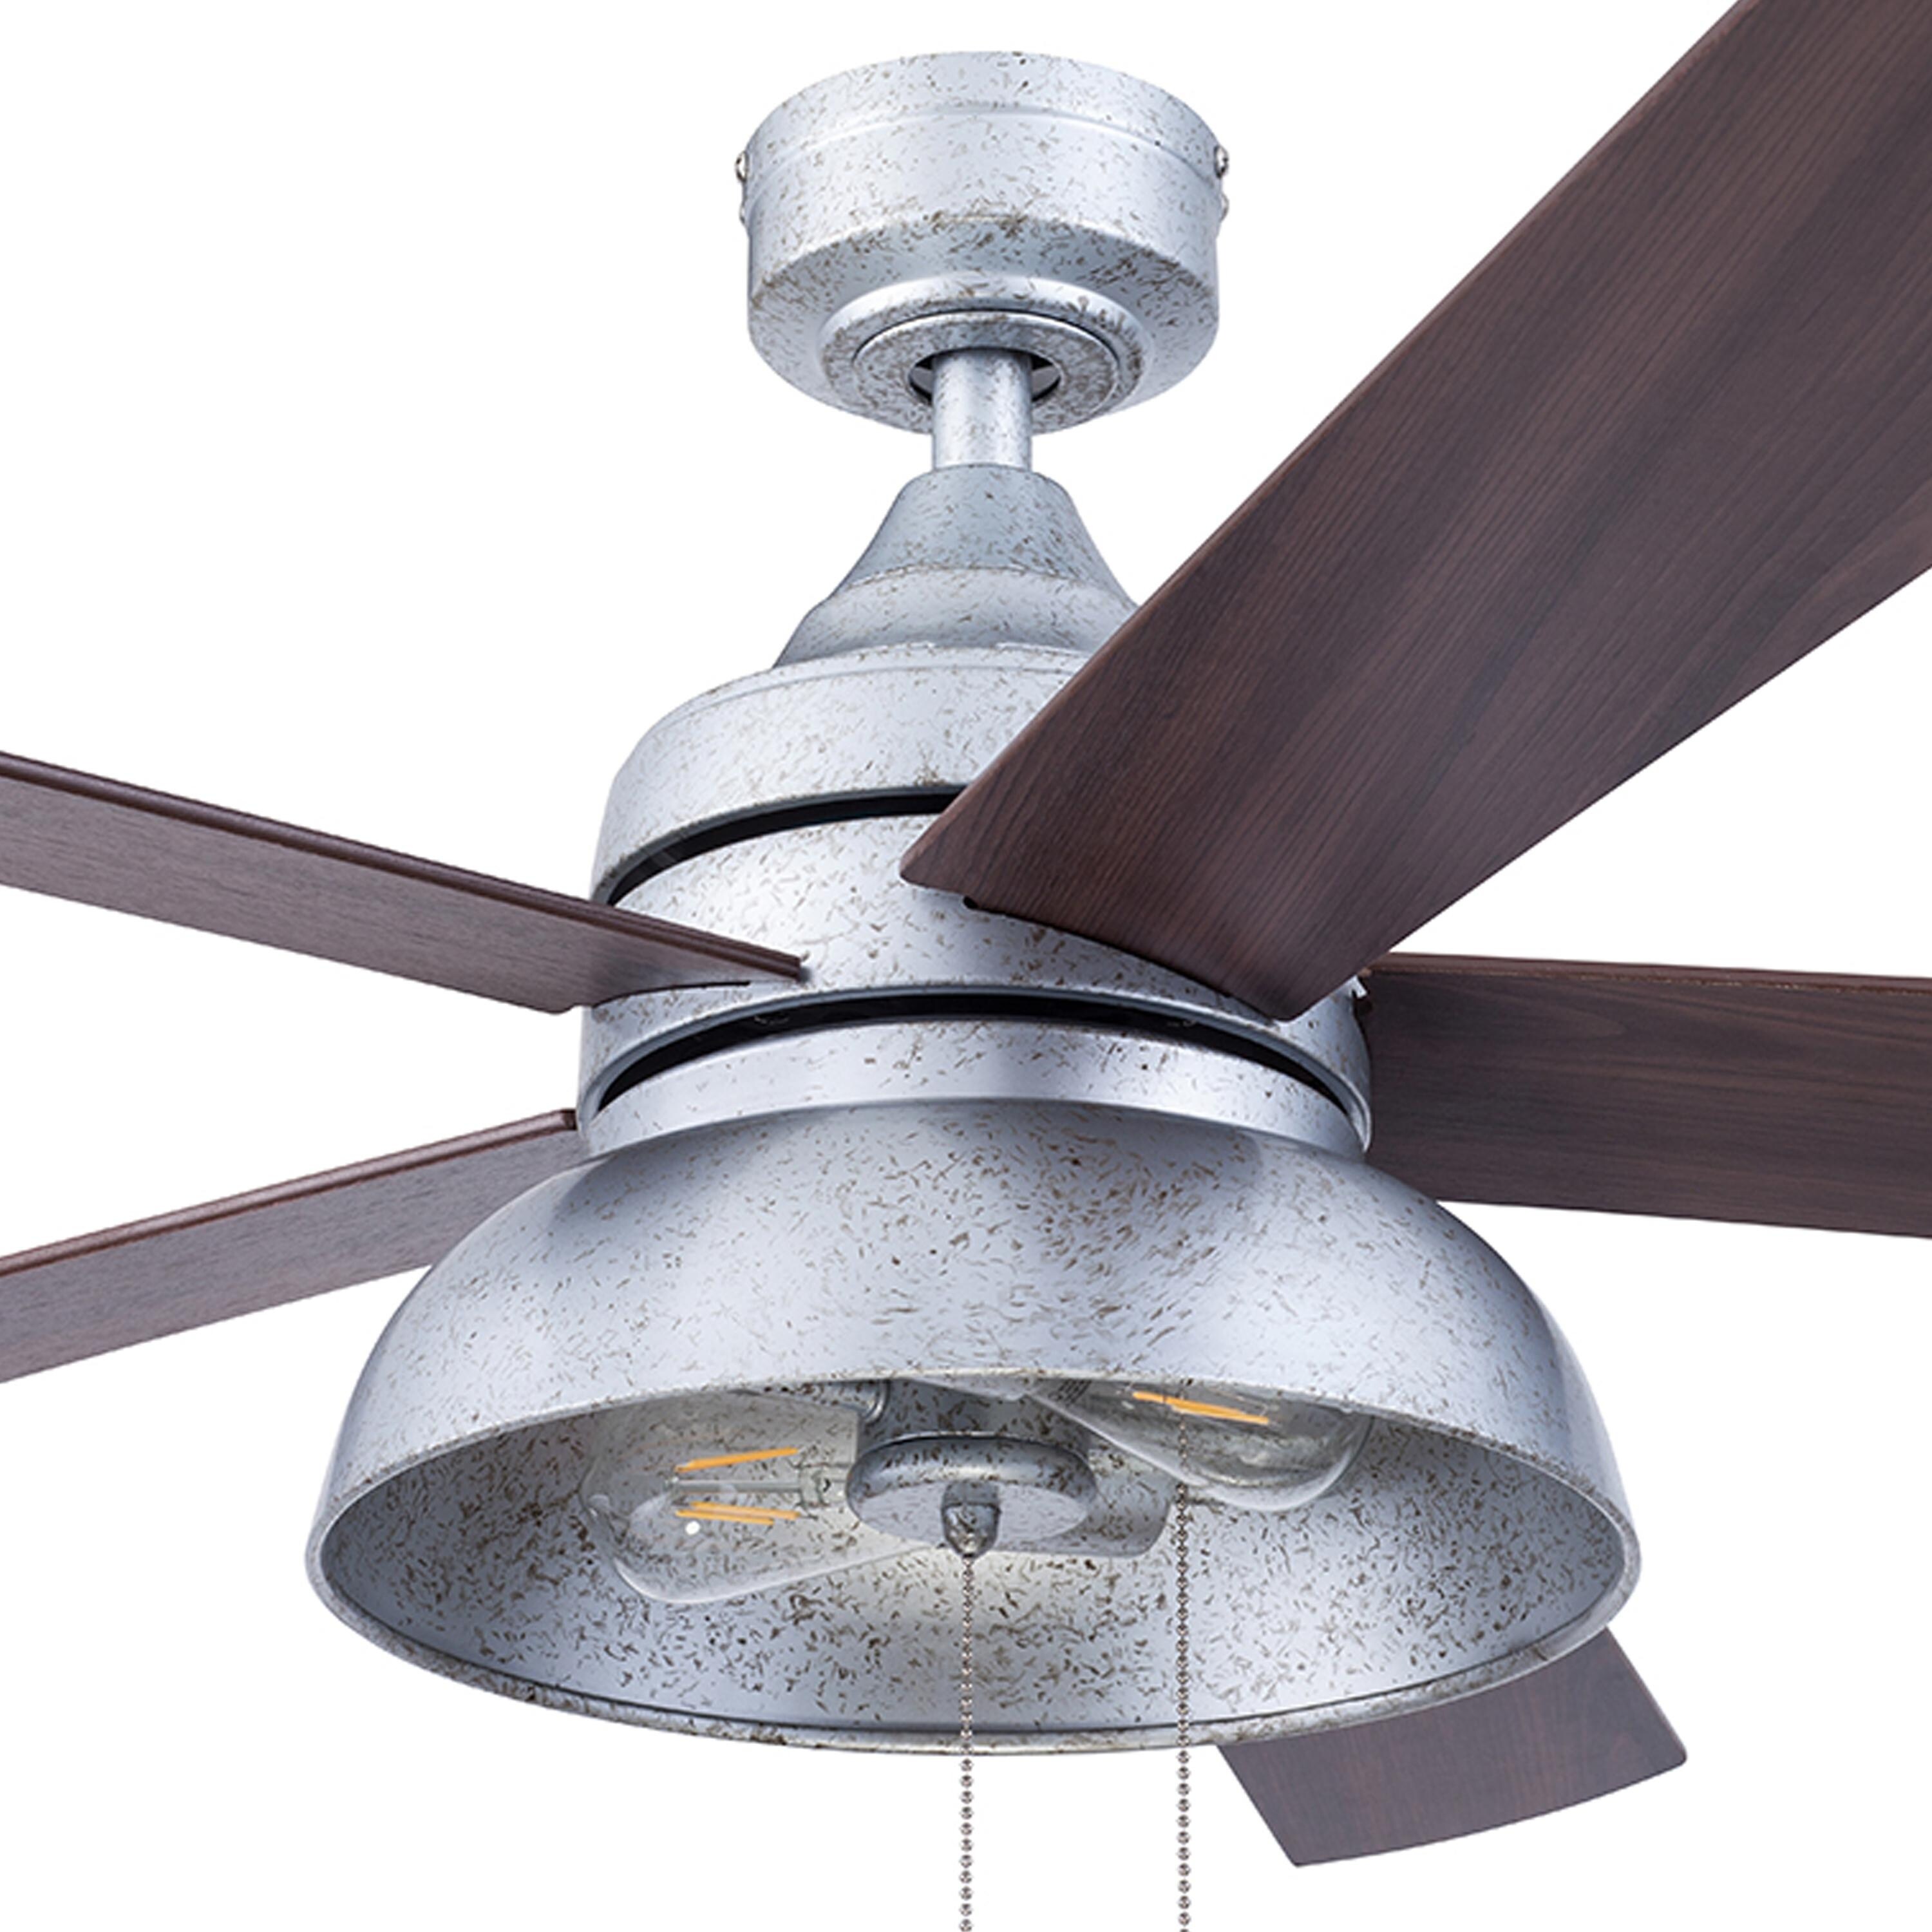 Prominence Home Brightondale 52-in Matte Black LED Indoor/Outdoor Ceiling Fan with Light (5-Blade)